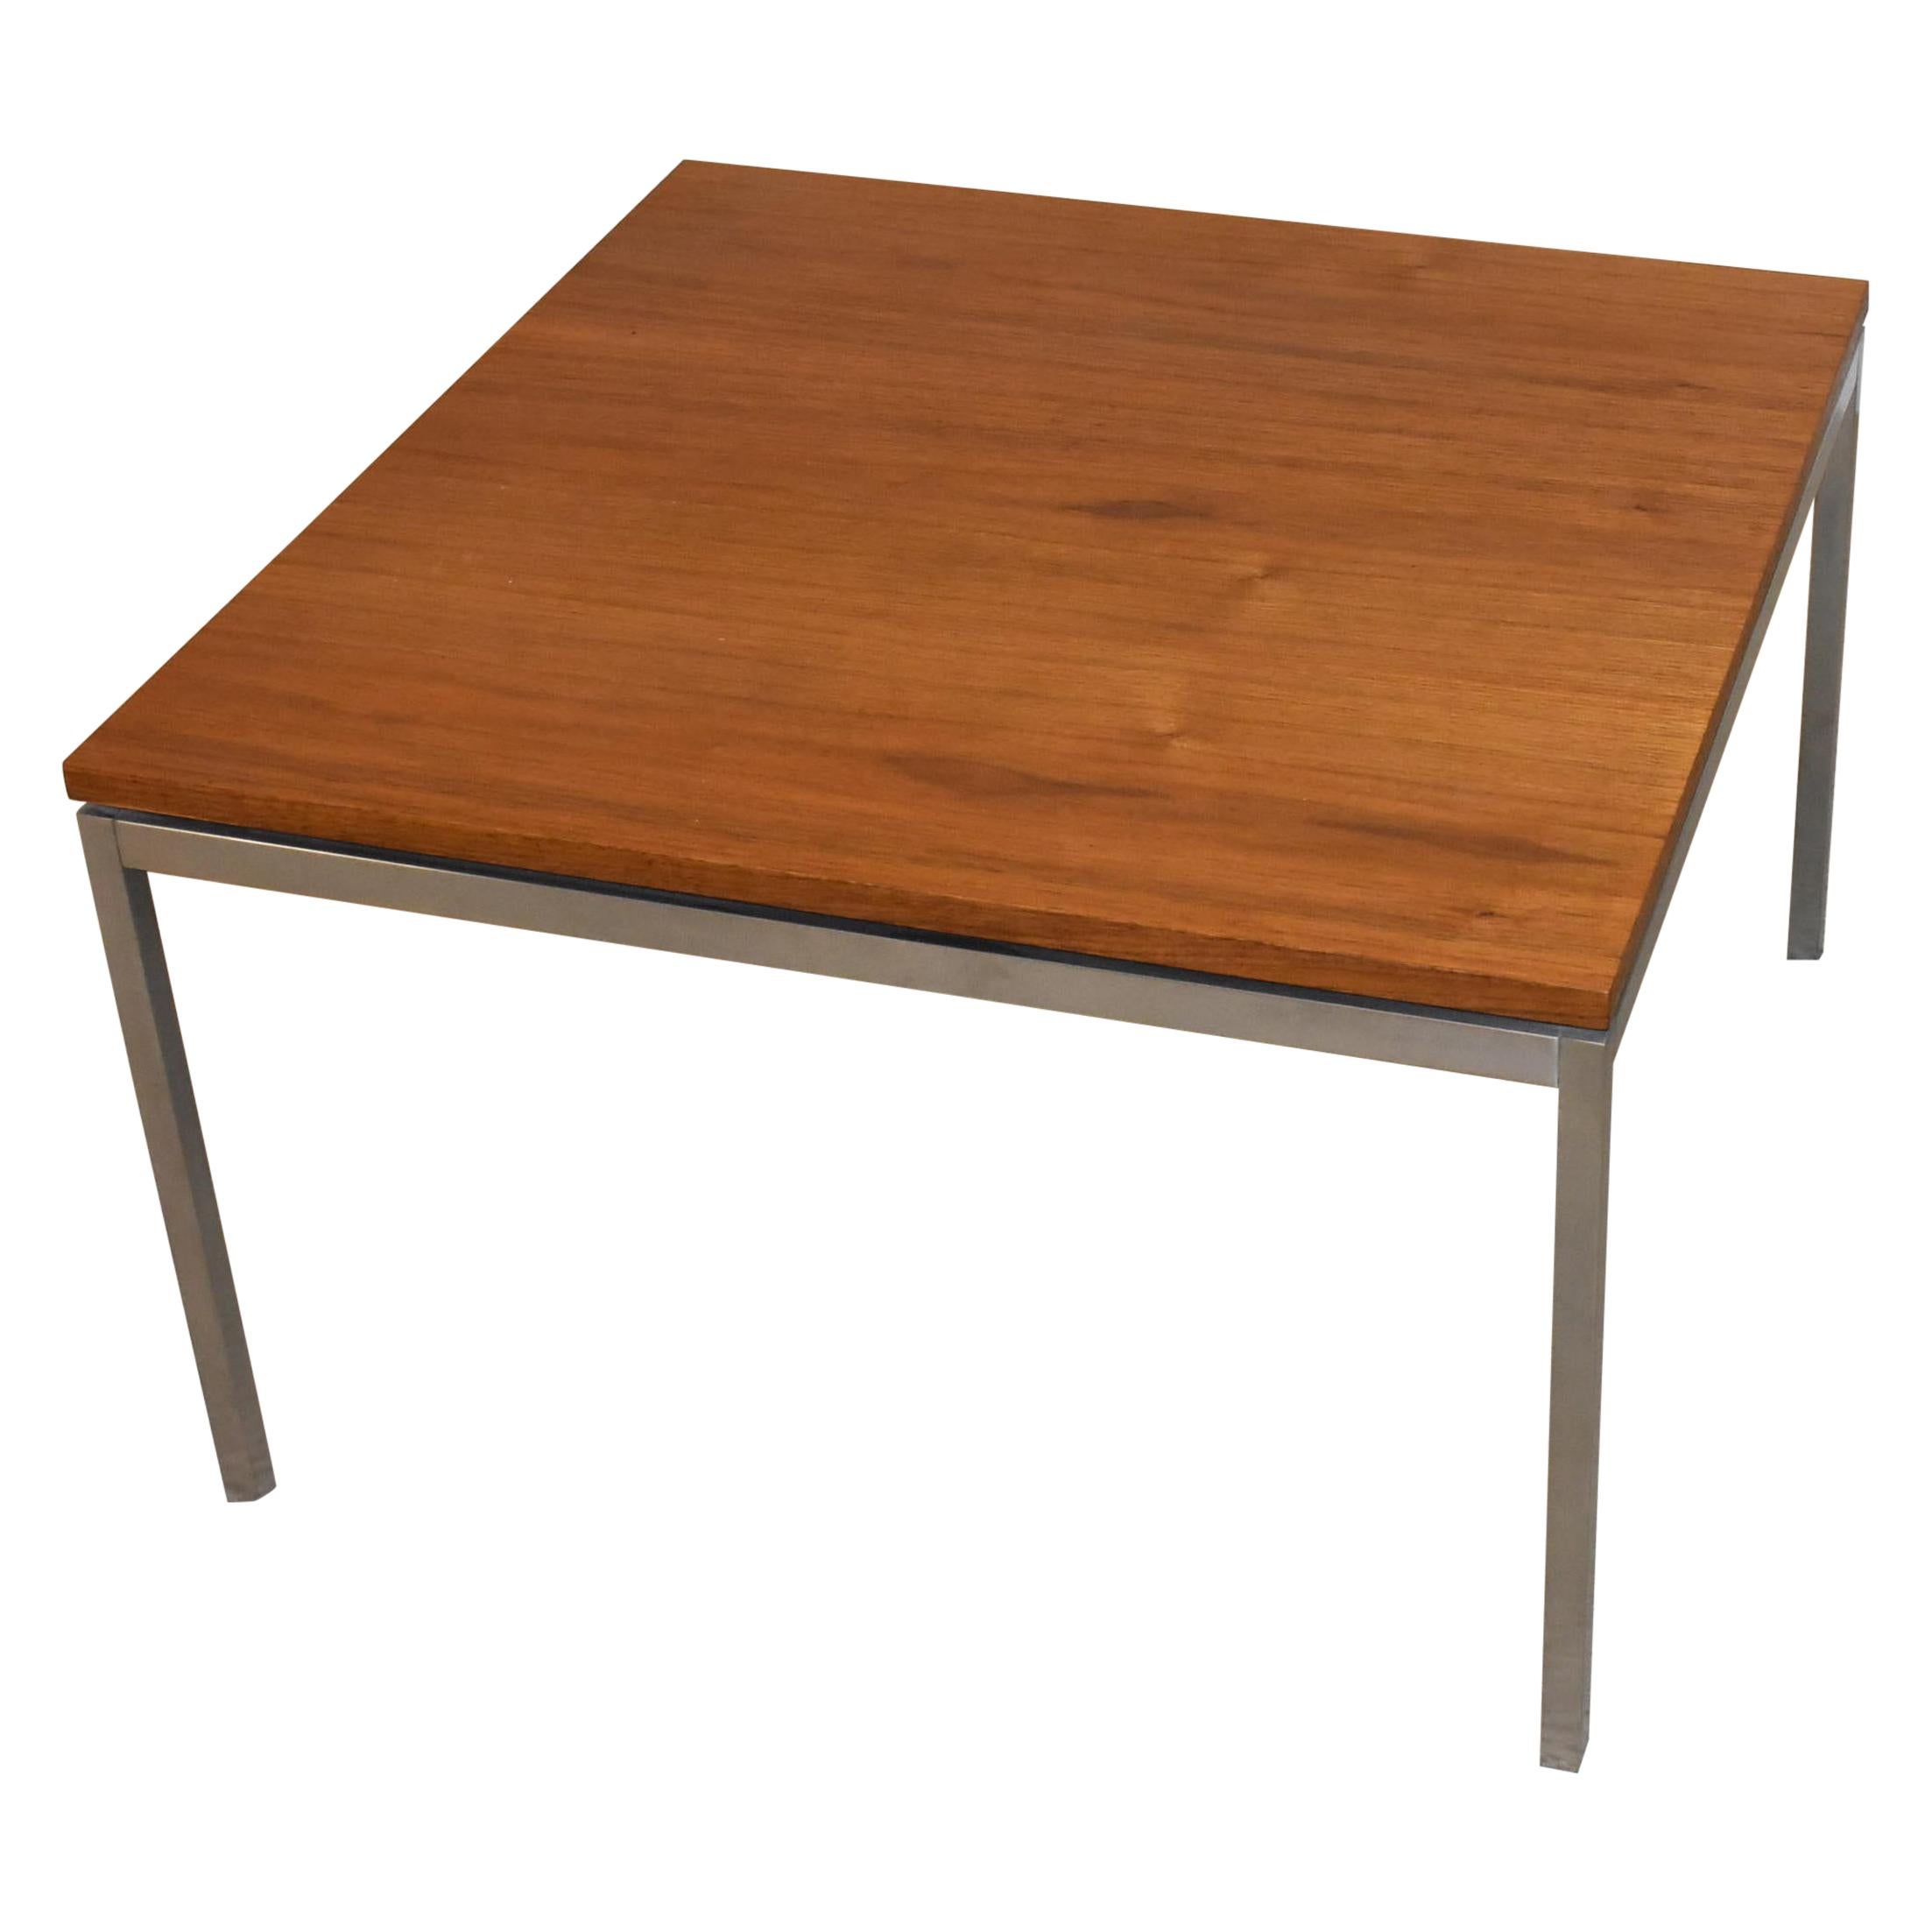 Mid-Century Modern Knoll Furniture Teak and Chrome Square Table